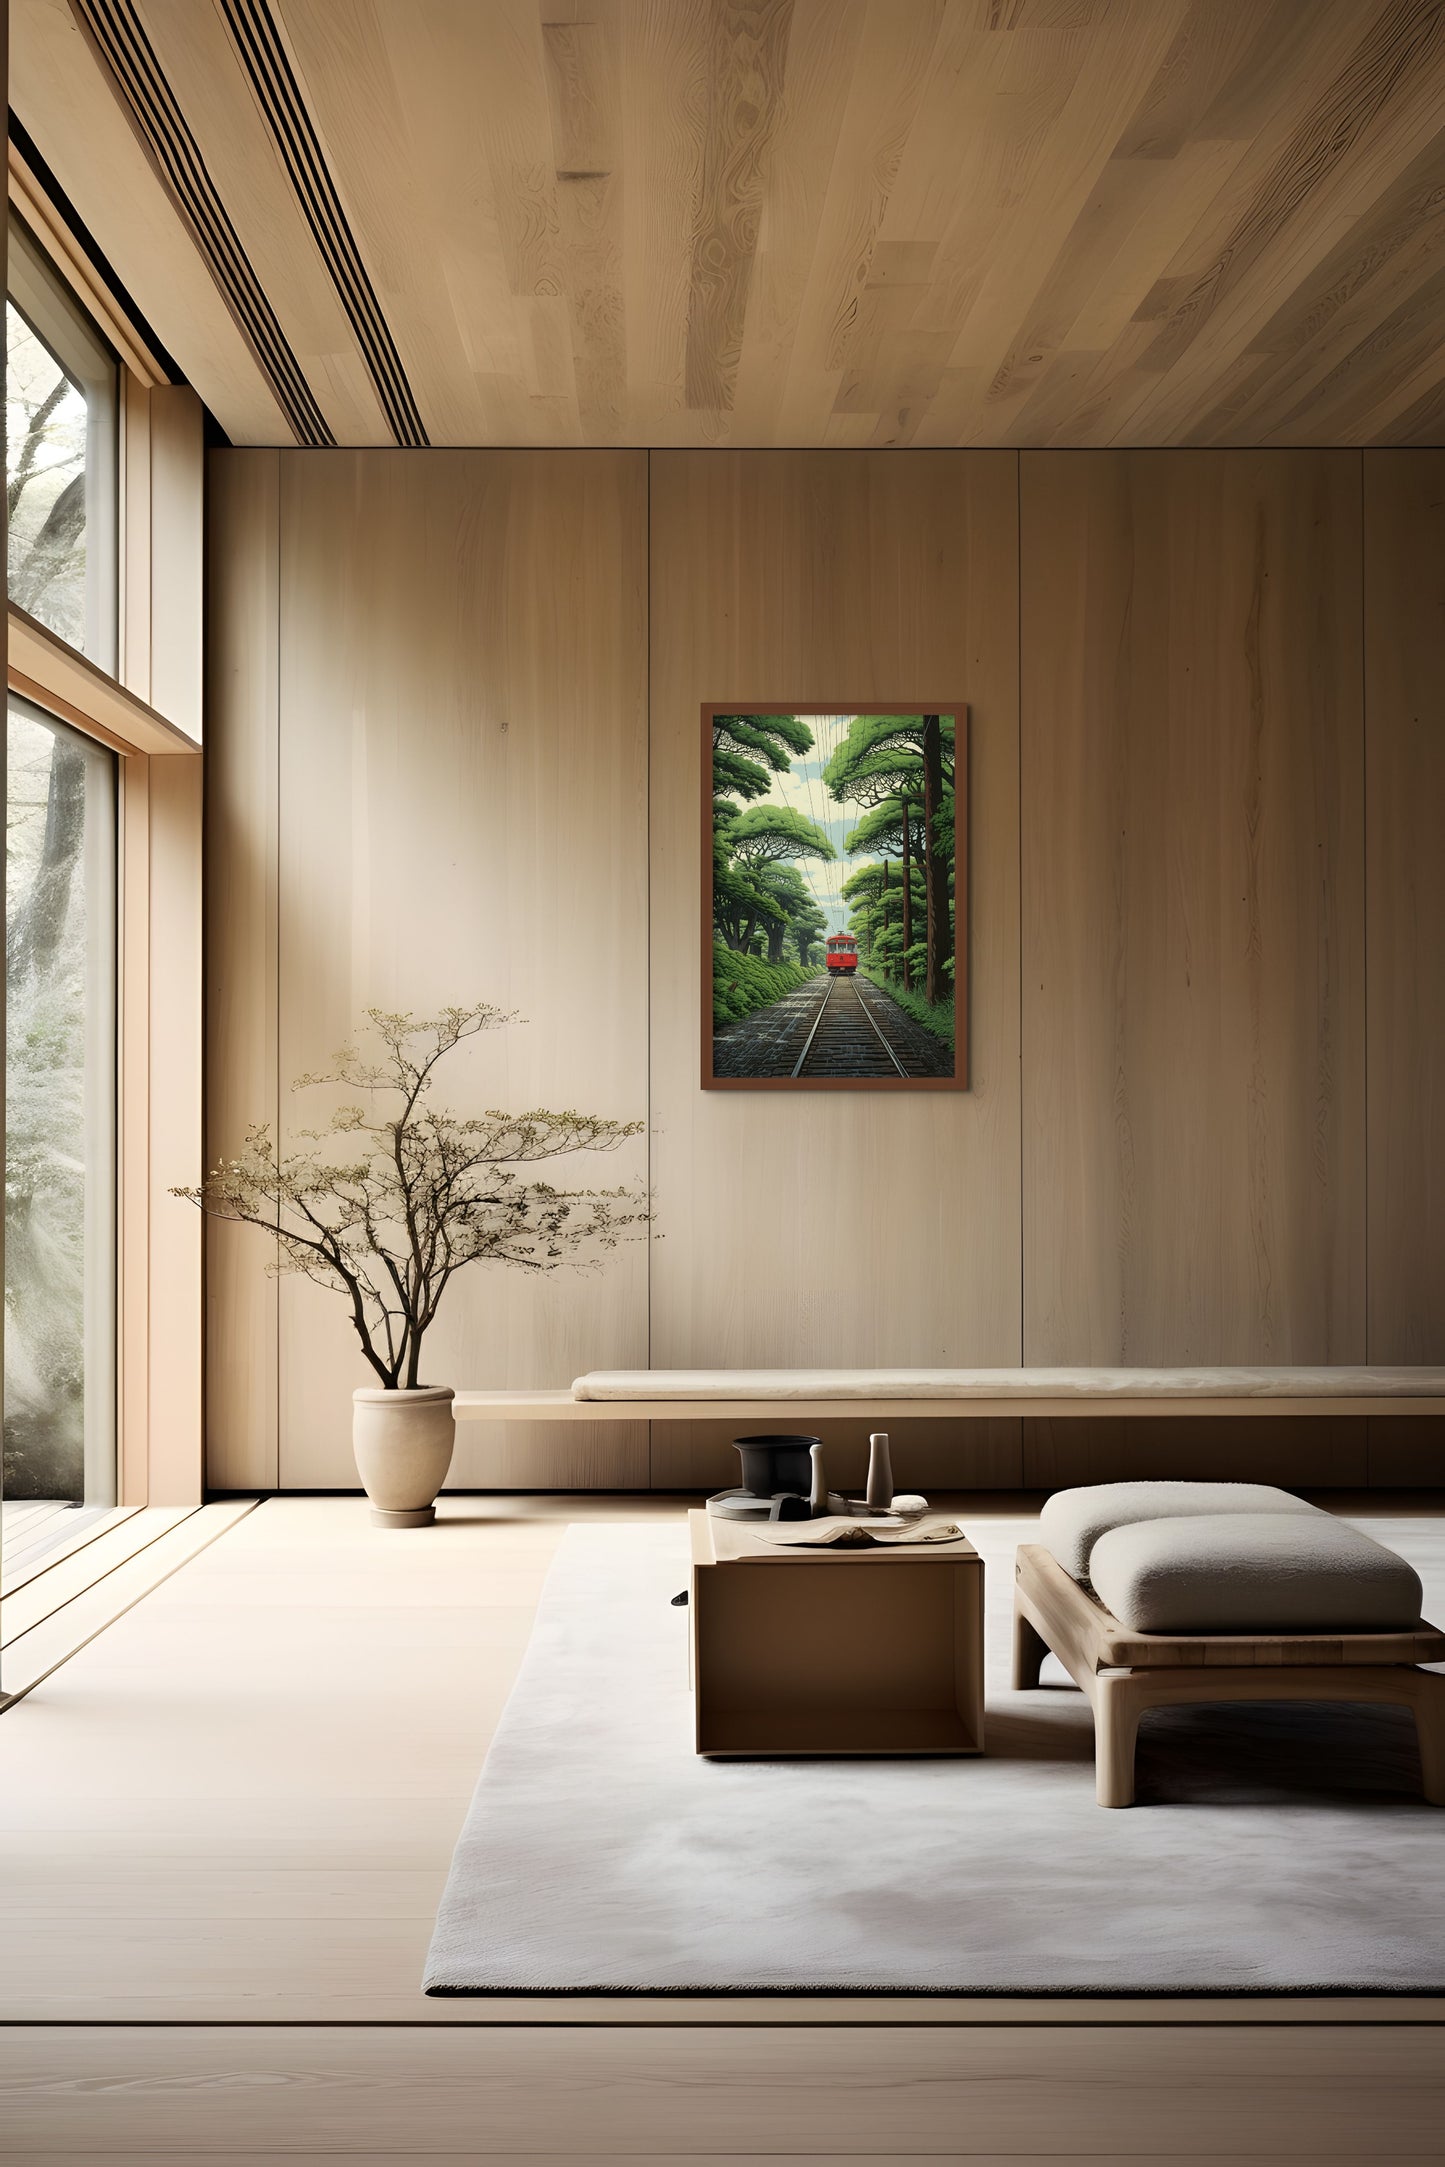 A tranquil minimalist interior with a bench, armchair, and artwork on a wooden wall.